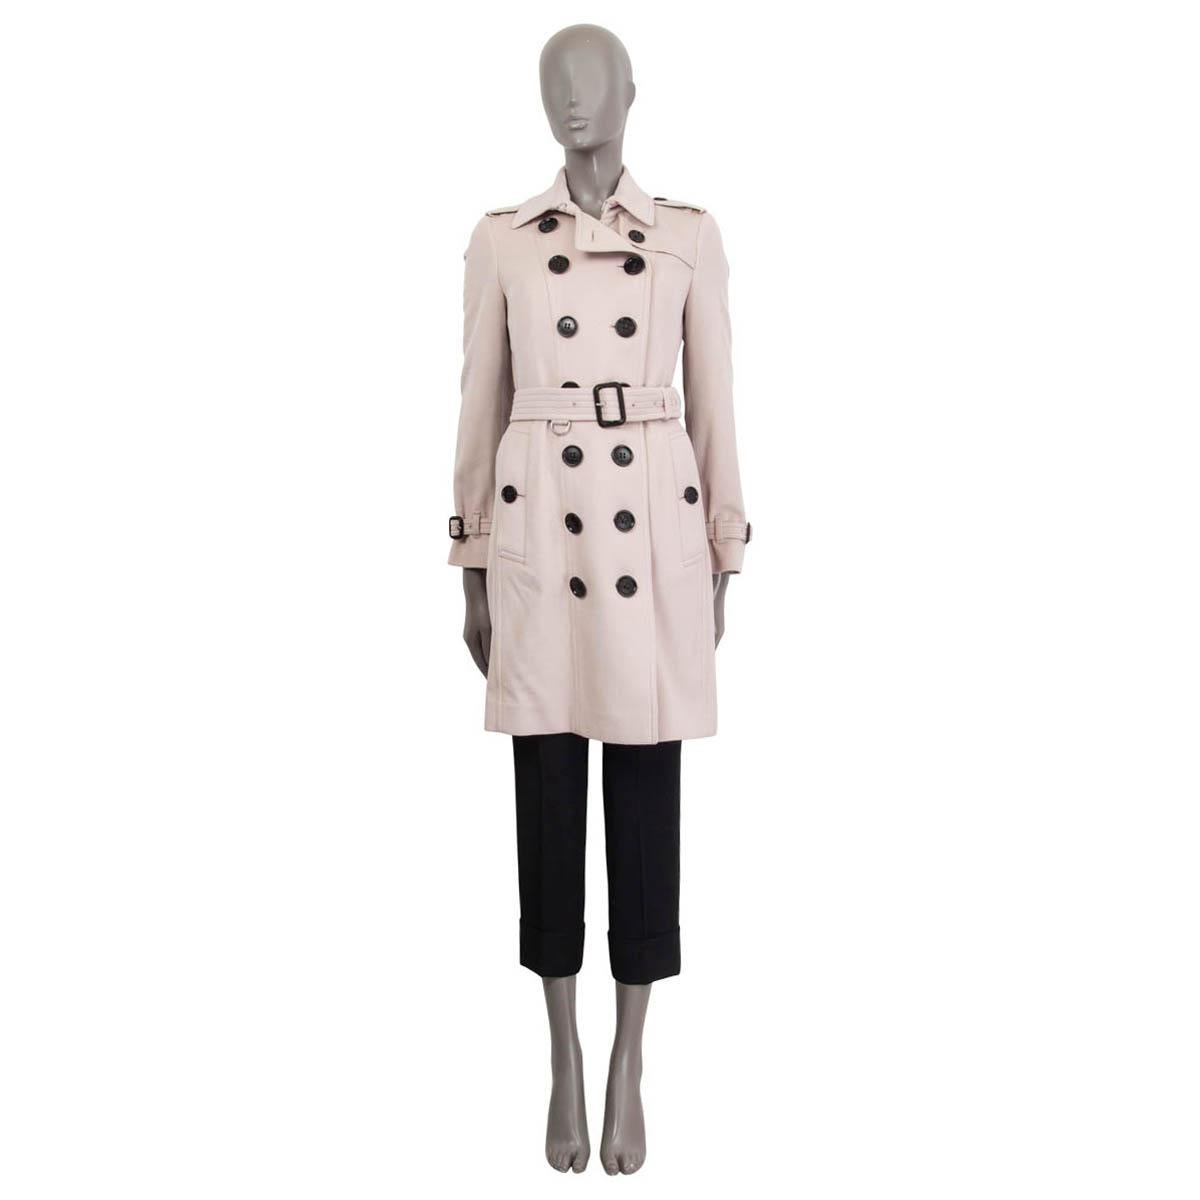 100% authentic Burberry 'The Sandringham' coat in pale rose cashmere (100%). Features epaulettes on the shoulders and the cuffs and a detachable belt. Opens with one hook and seven buttons on the front. Unlined. Has been worn and is in excellent